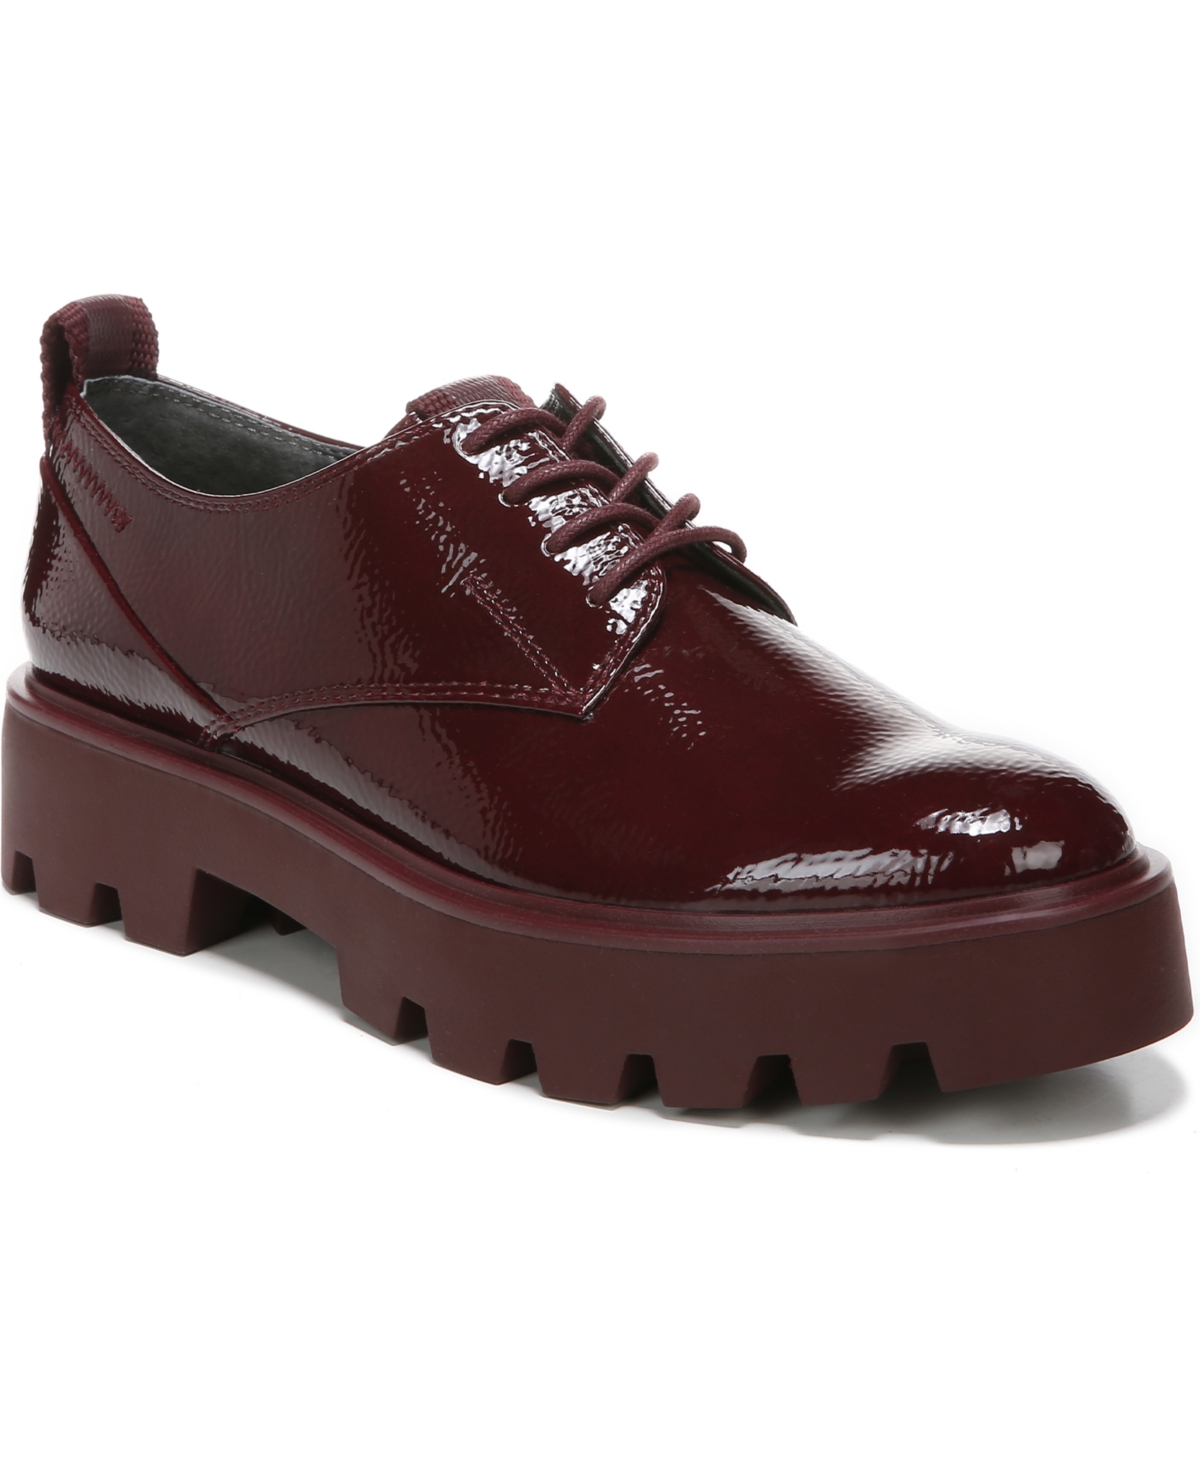 UPC 017138587600 product image for Franco Sarto Balin-Laced Lug Sole Oxfords Women's Shoes | upcitemdb.com